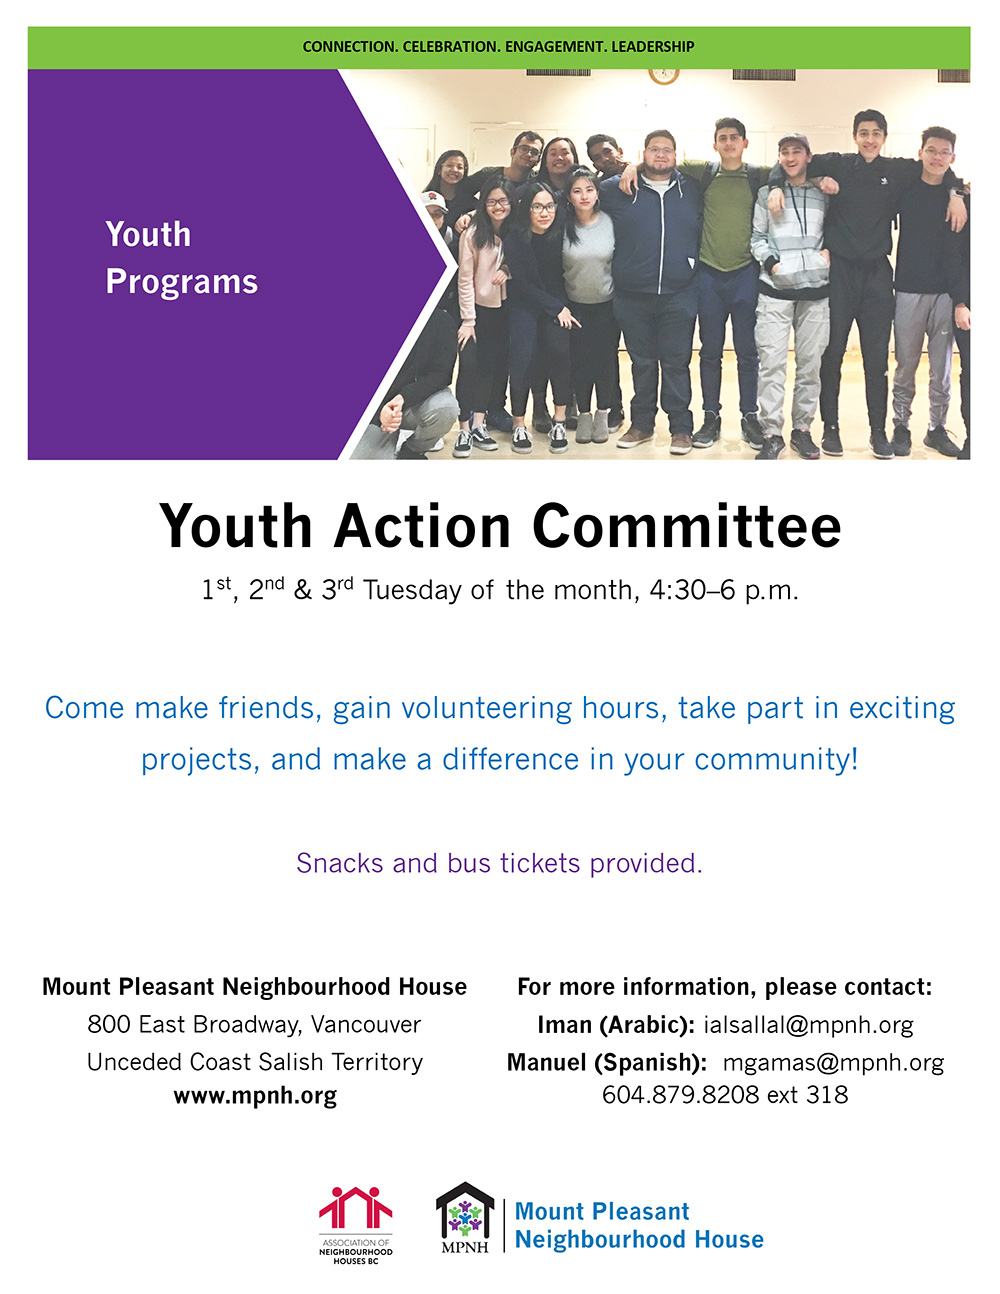 Poster for the Youth Action Committee showing a big group of young people smiling